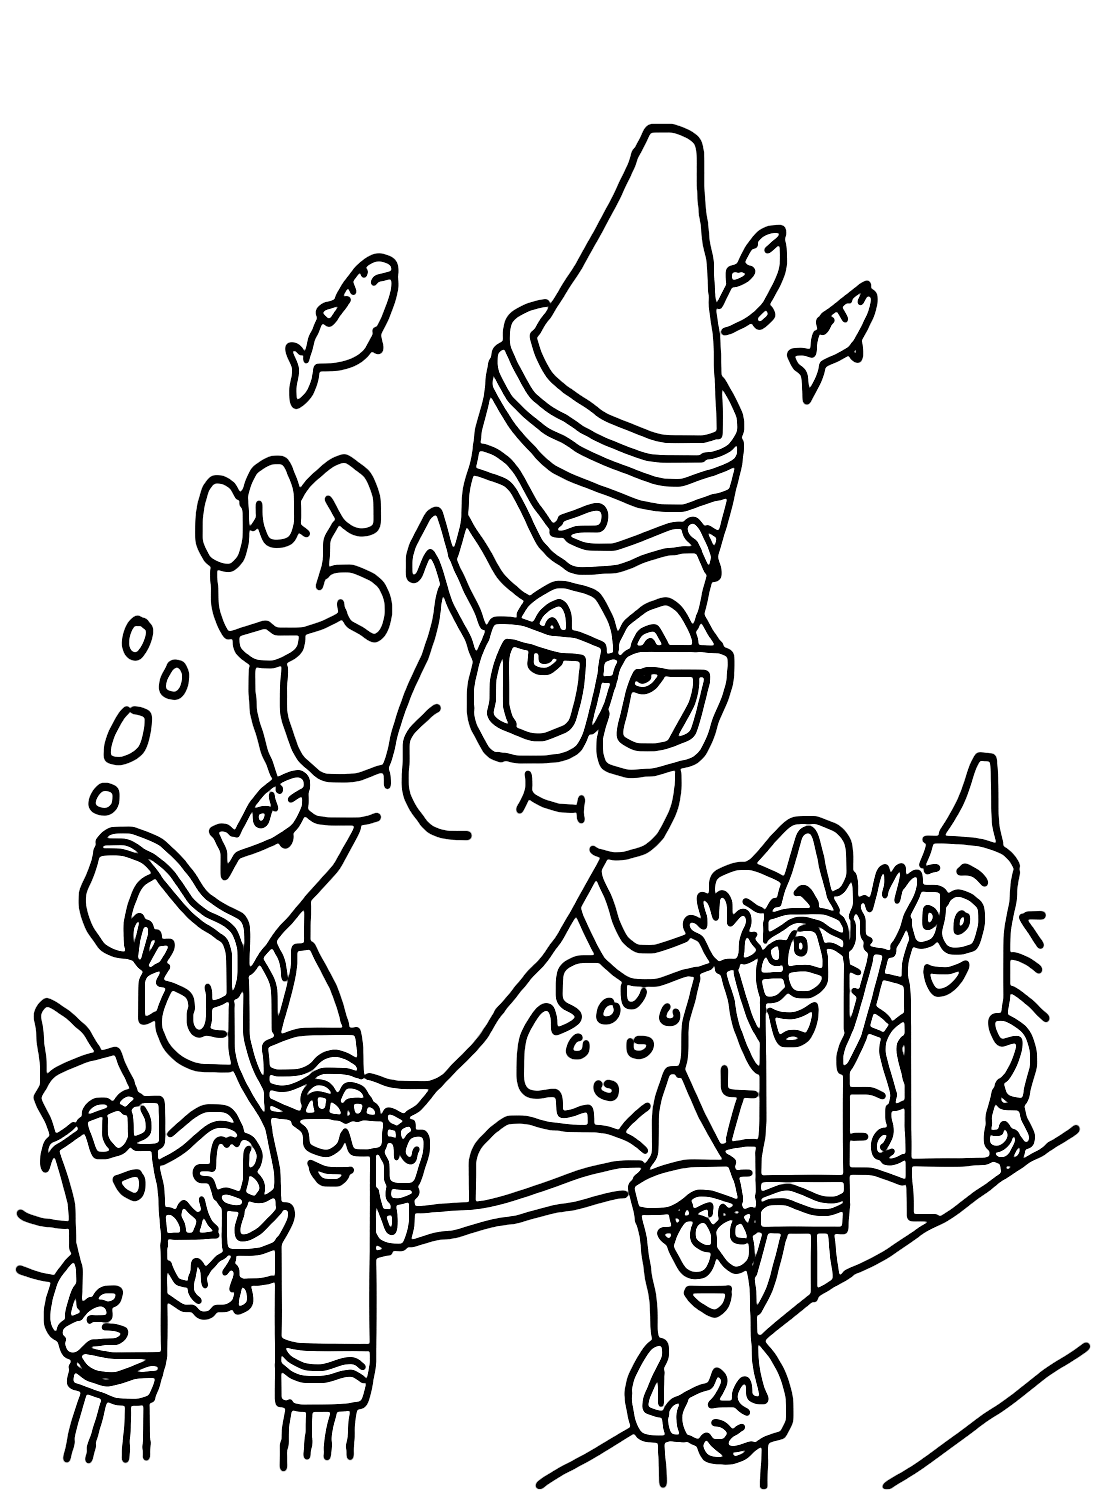 Crayola Coloring Page Free Printable Coloring Pages